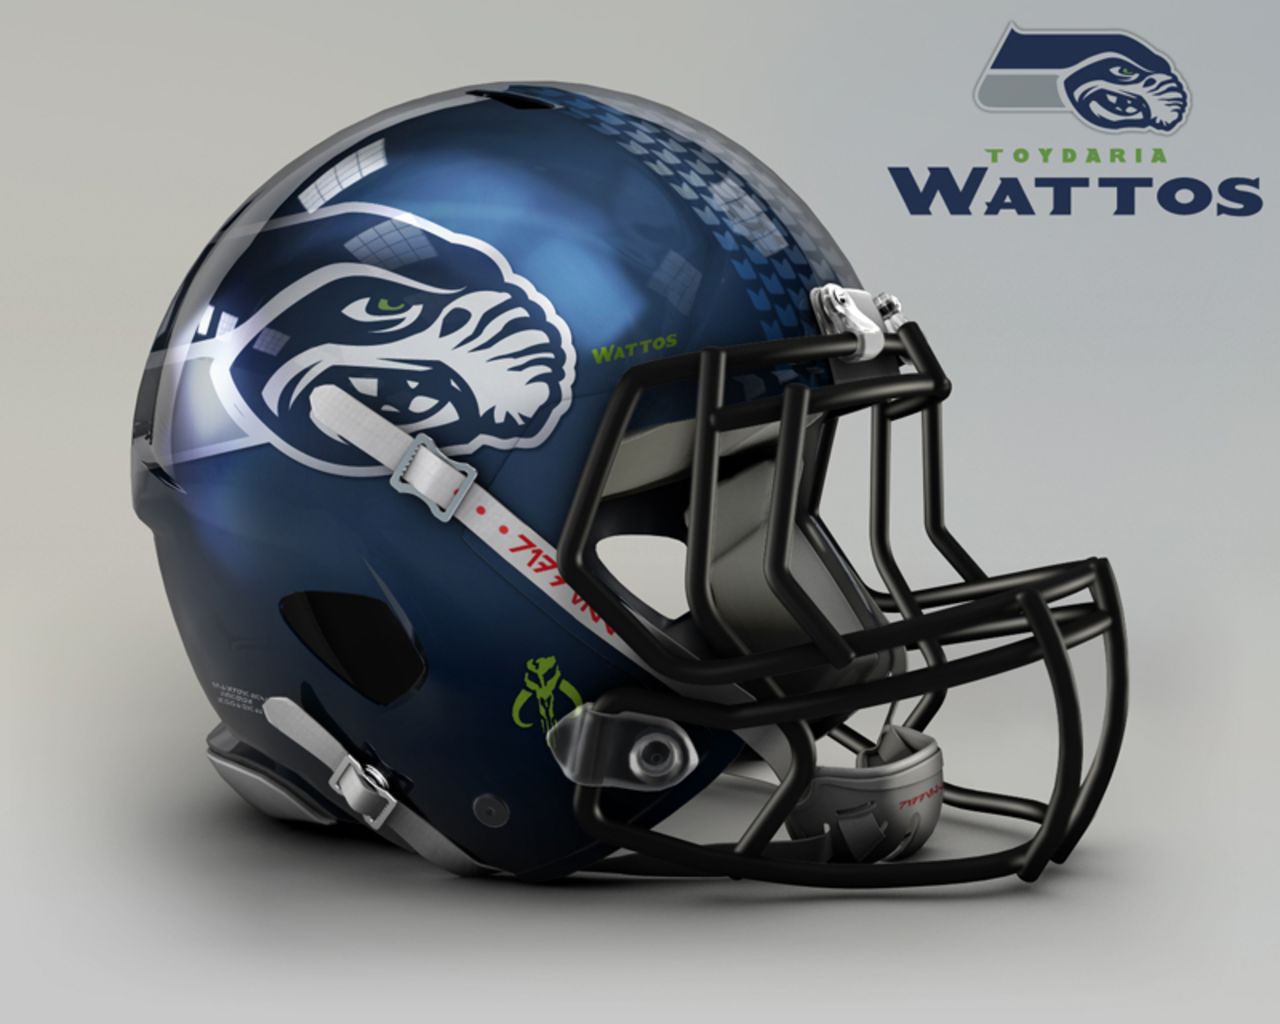 The menacing livery of the <a href="http://www.seahawks.com/" target="_blank" target="_blank">Seattle Seahawks</a> helmet is perfectly preserved in their transition to Toydaria Wattos: the flying junk dealer who enslaves Anakin Skywalker as a boy might not be as a graceful a sight in the sky, though.